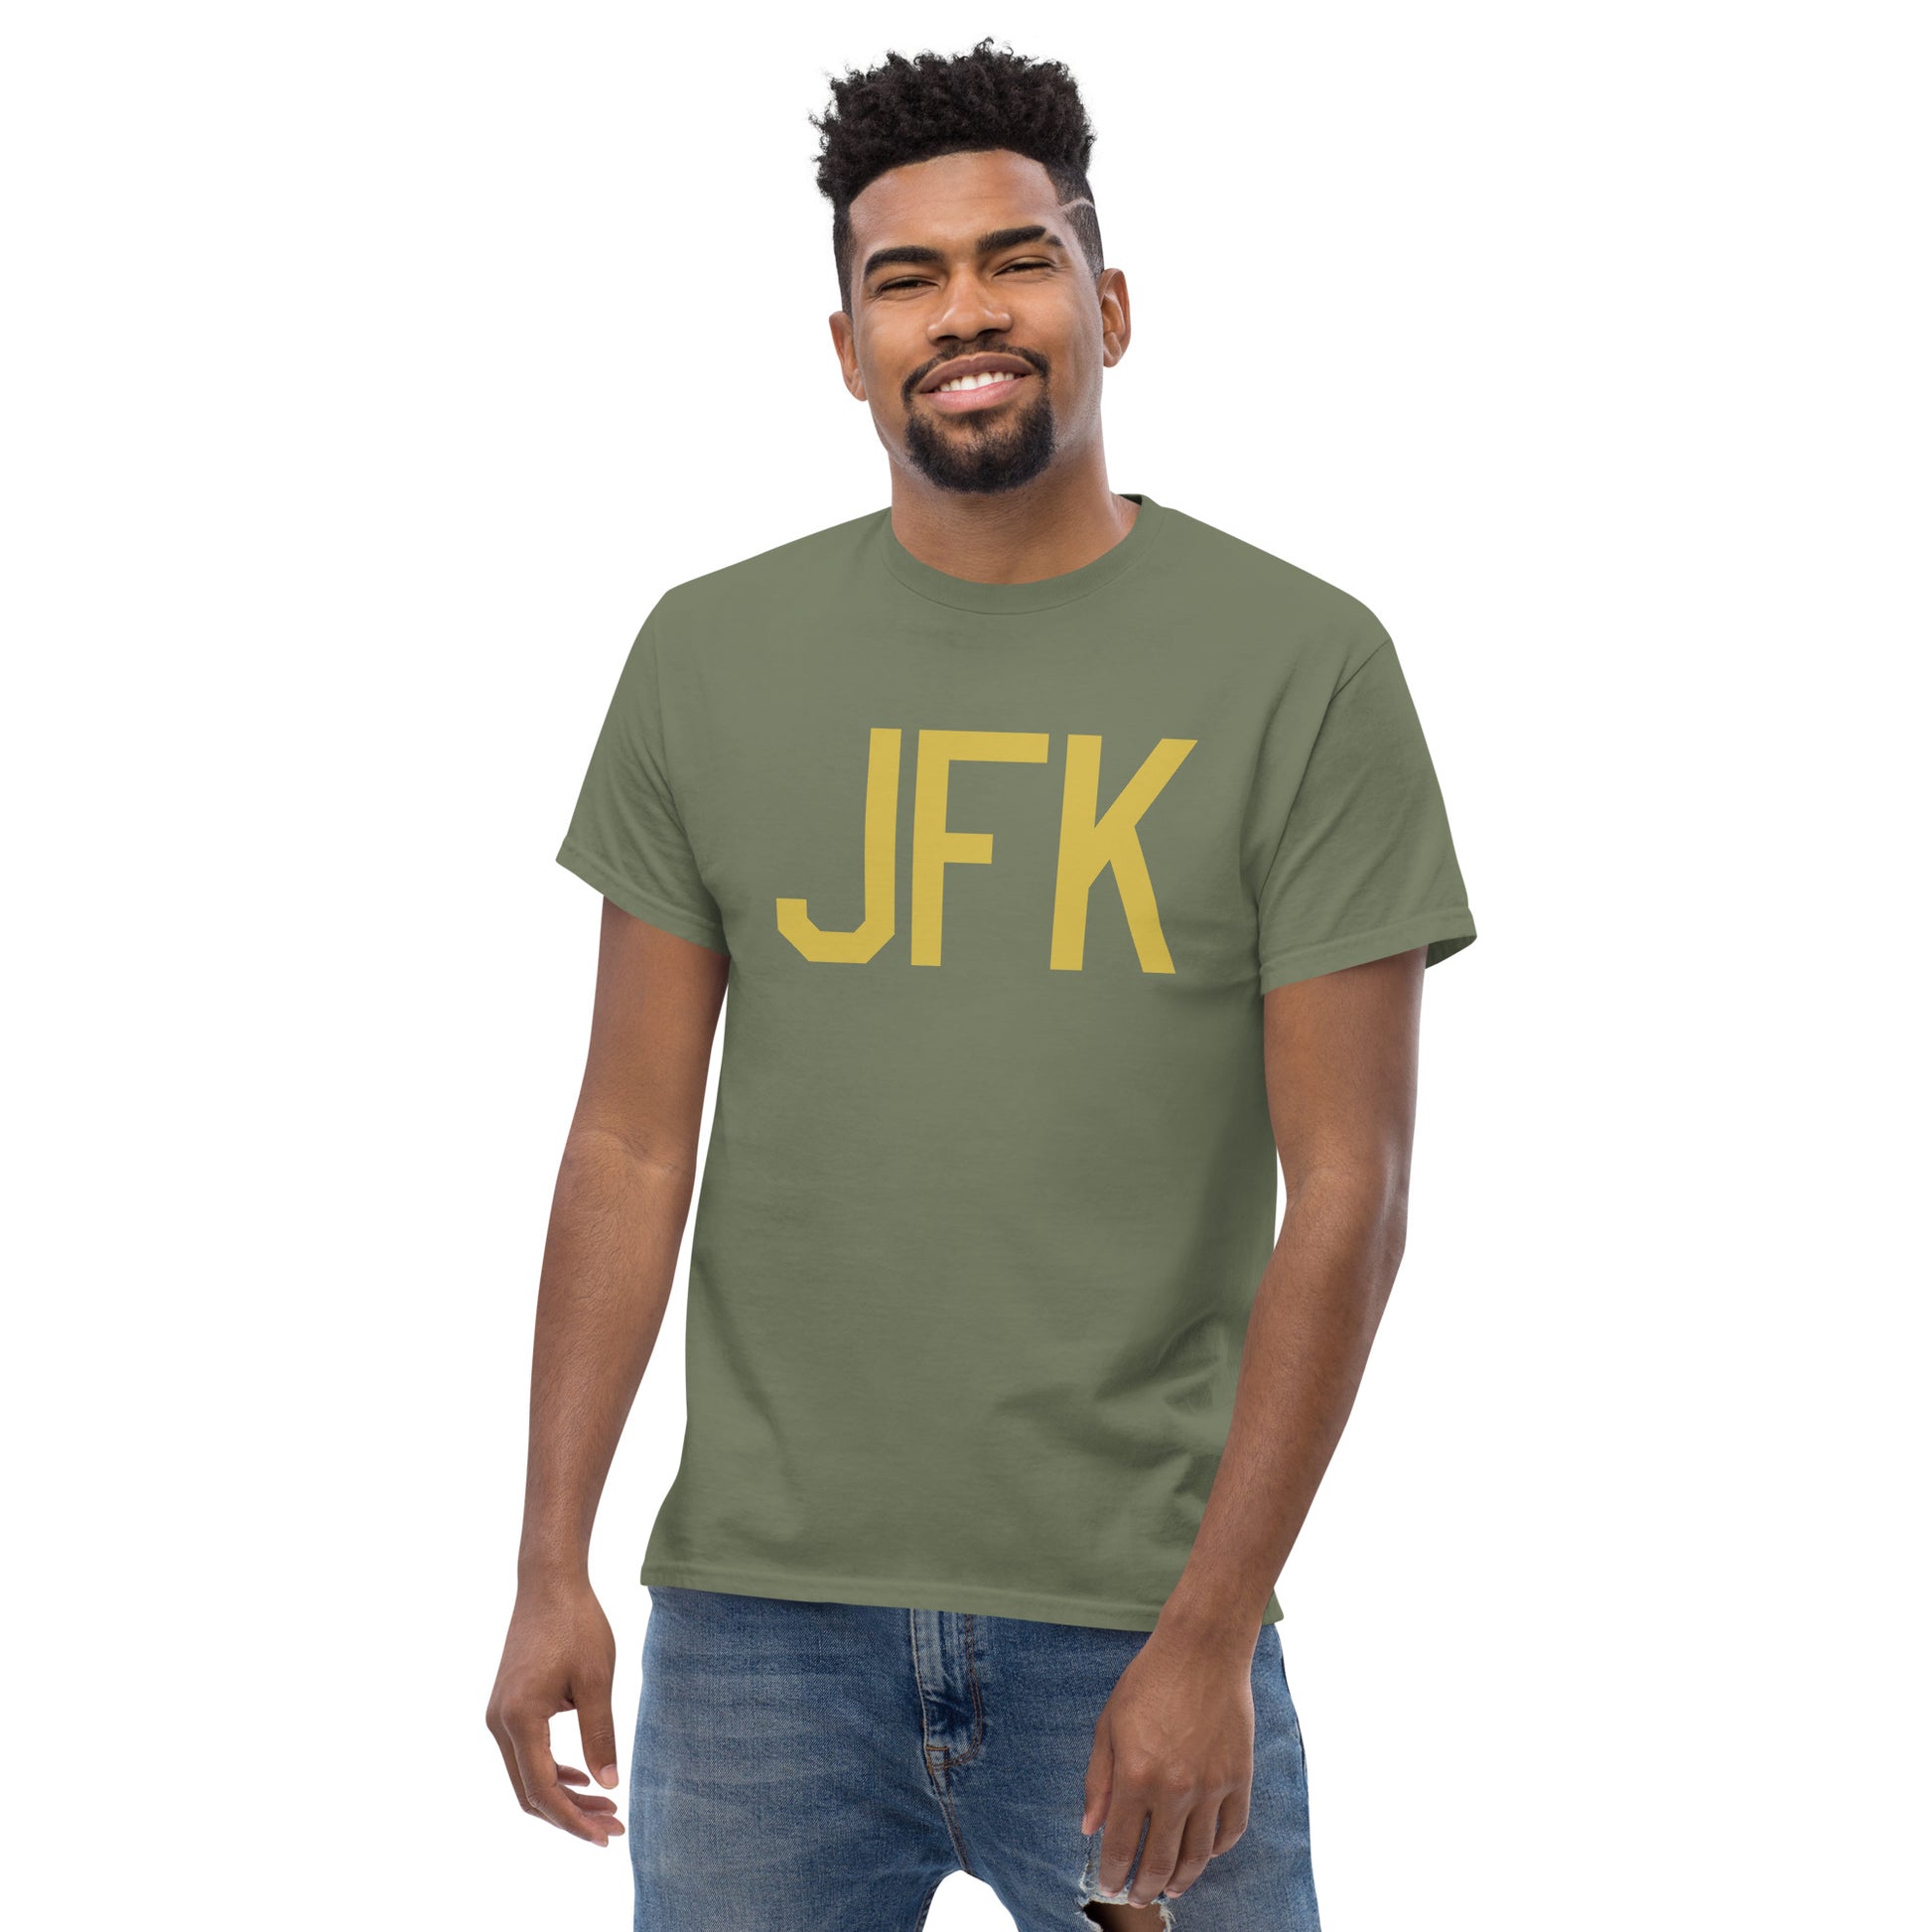 Aviation Enthusiast Men's Tee - Old Gold Graphic • JFK New York City • YHM Designs - Image 06